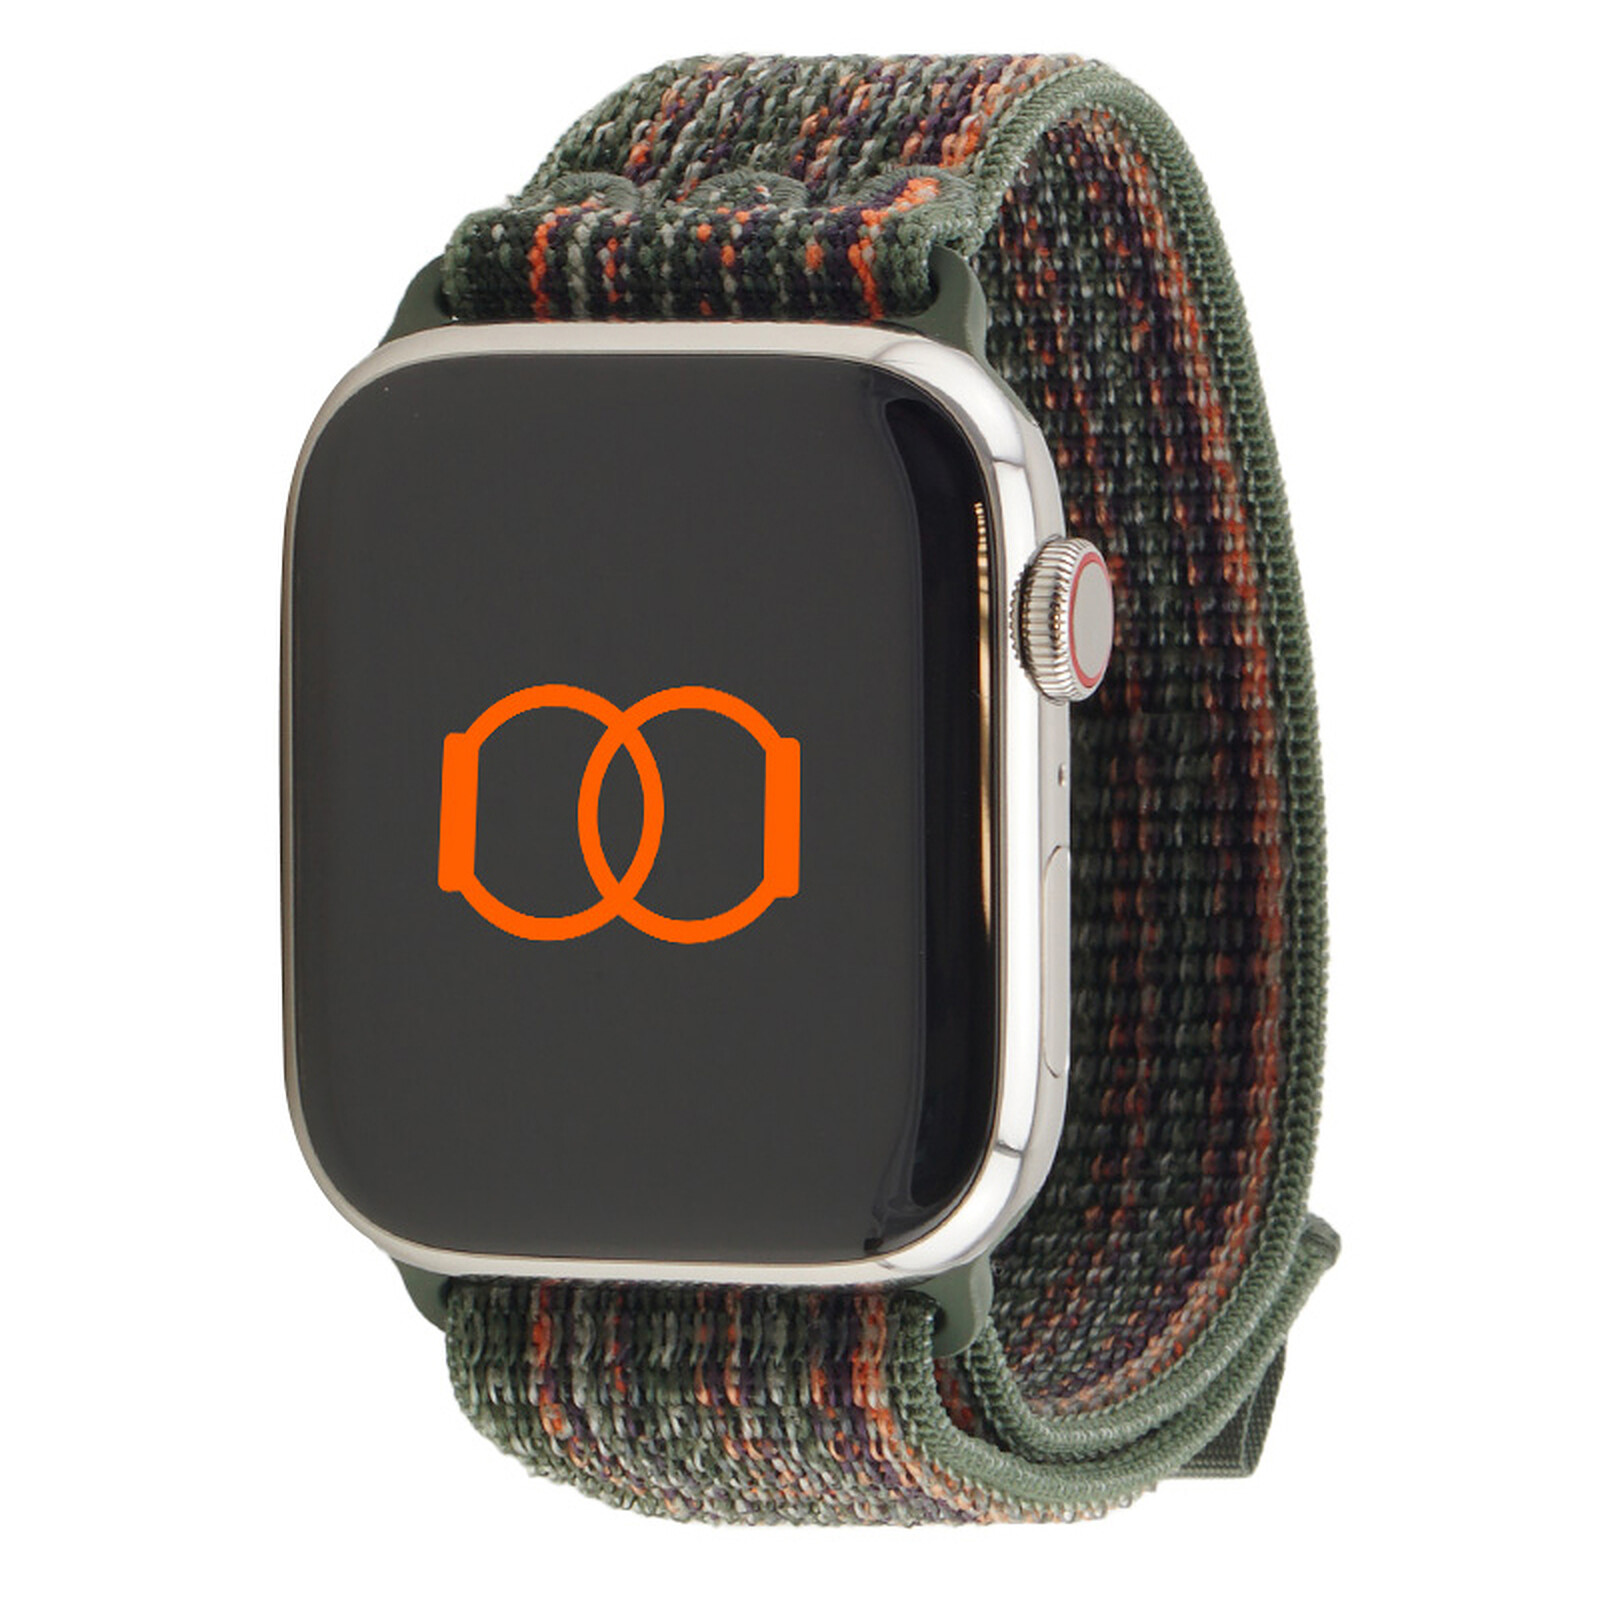 Green - Buckle LDLC - 49 accessories Nylon Band Sport Wearable Band Woven mm Sequoia/Orange